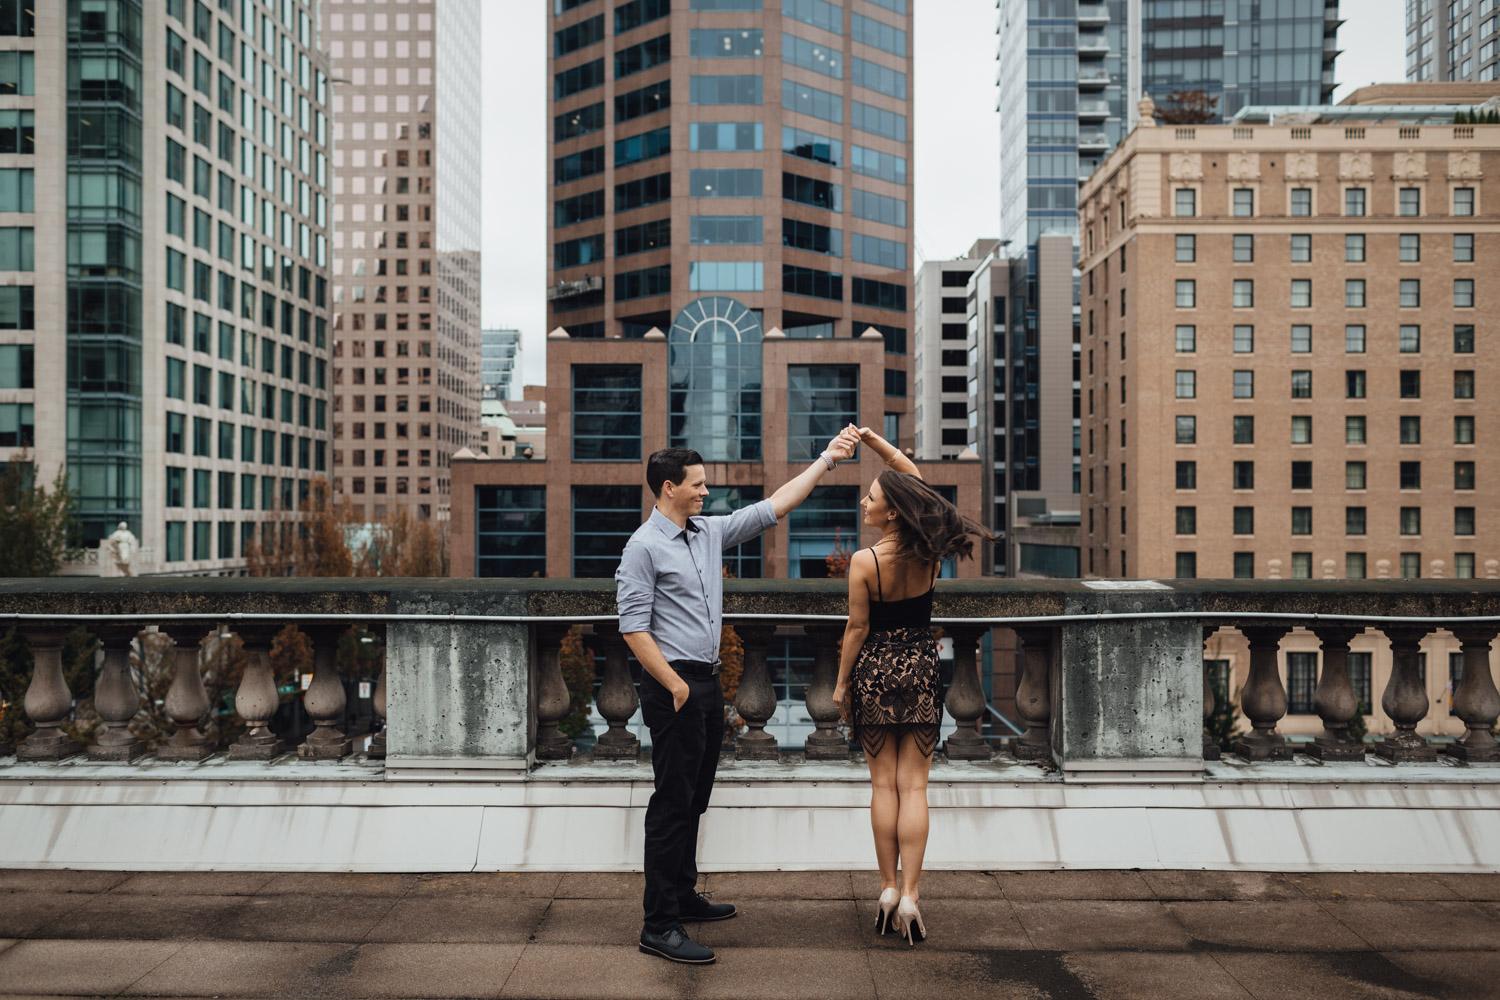 vancouver art gallery downtown engagement photography bc candid twirl rooftop